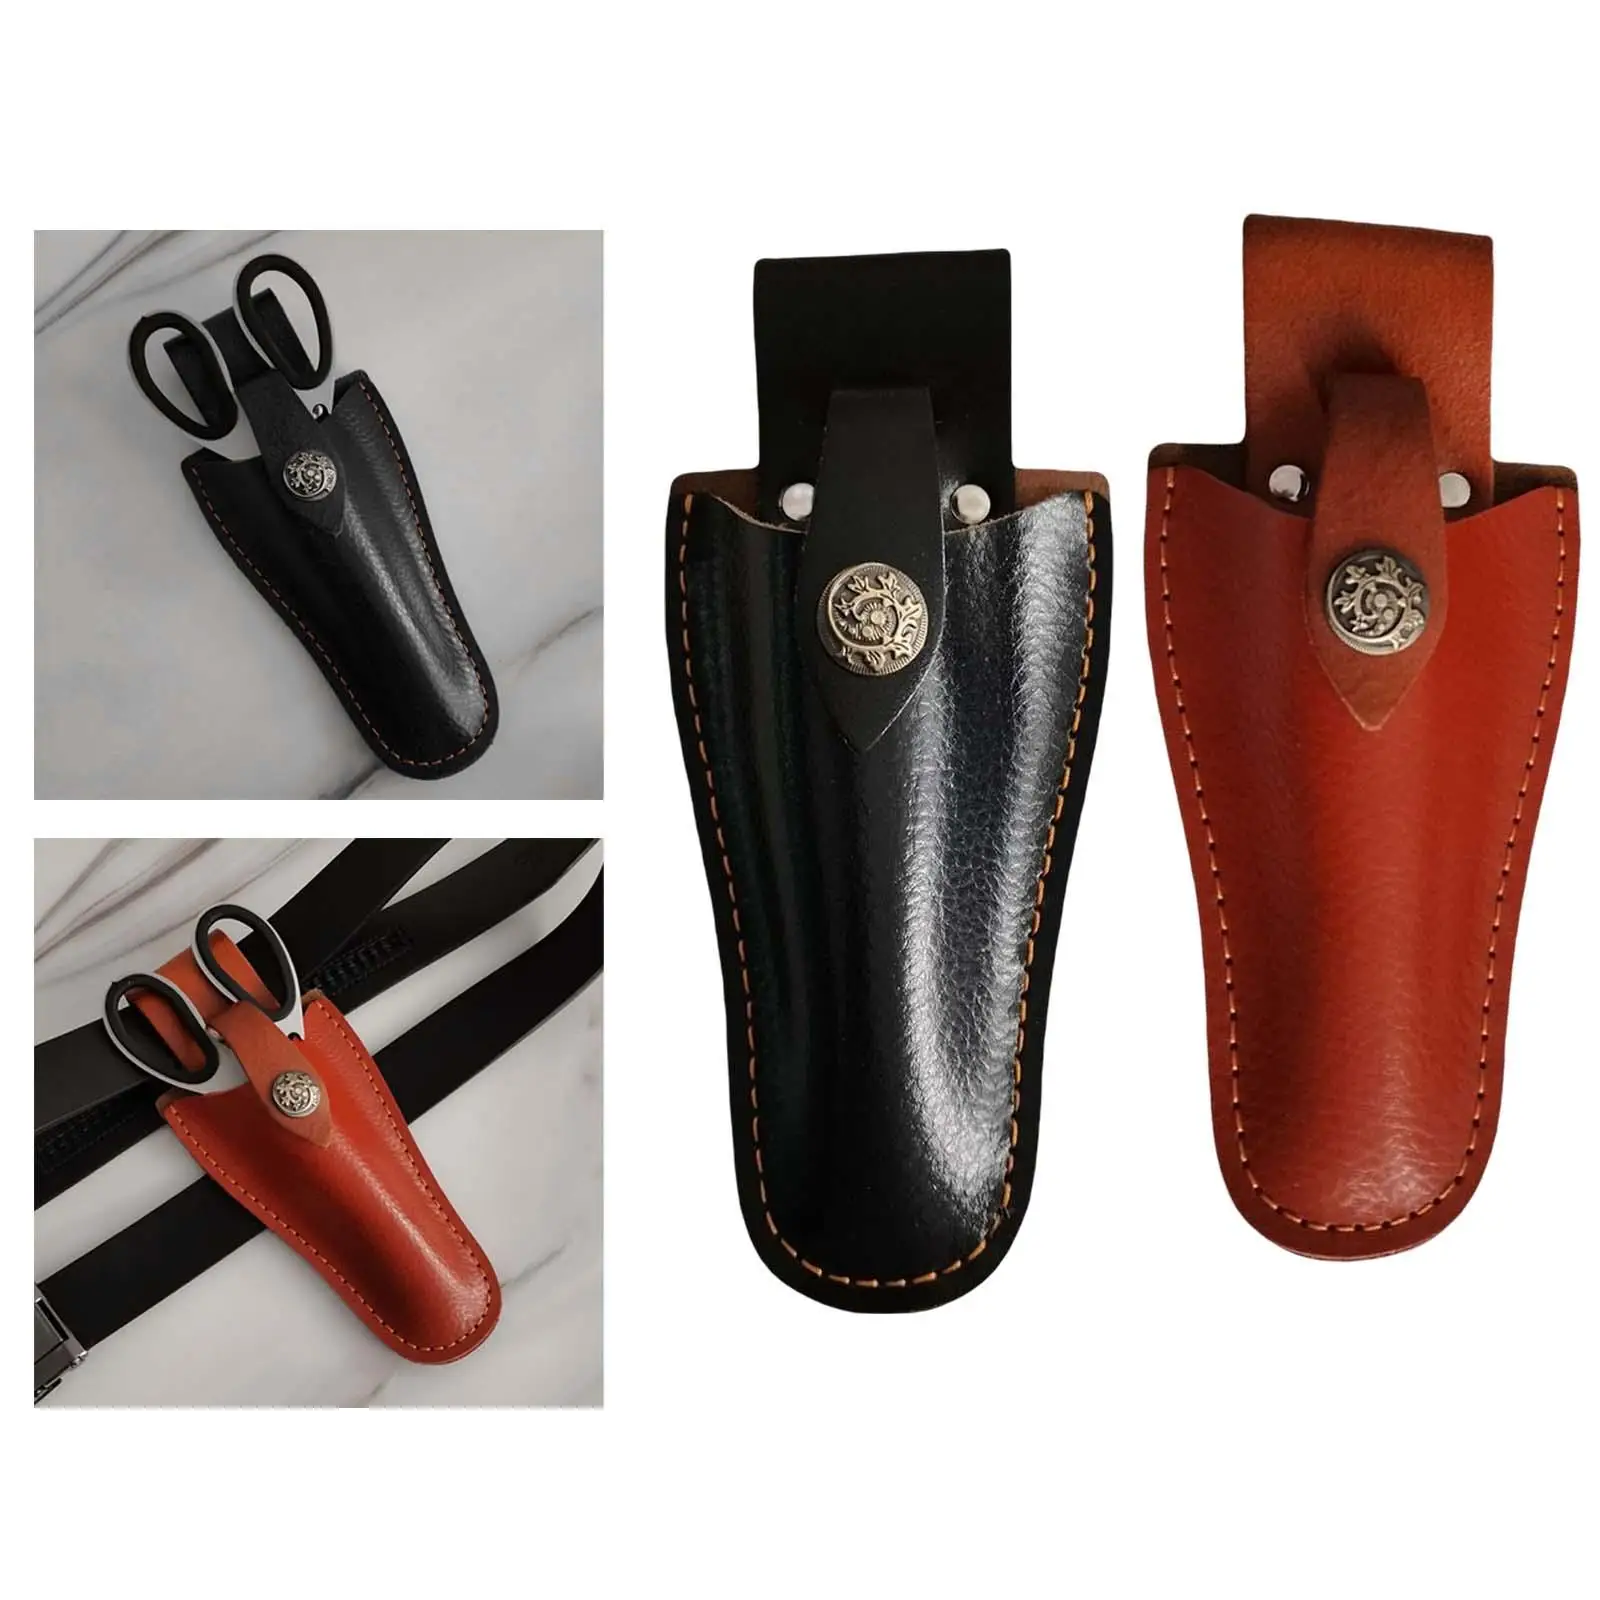 PU Leather Sheath Protective Case Tool Belt Accessory Pruning Shear for Garden Pruning Fruit Tree Pruning Shears